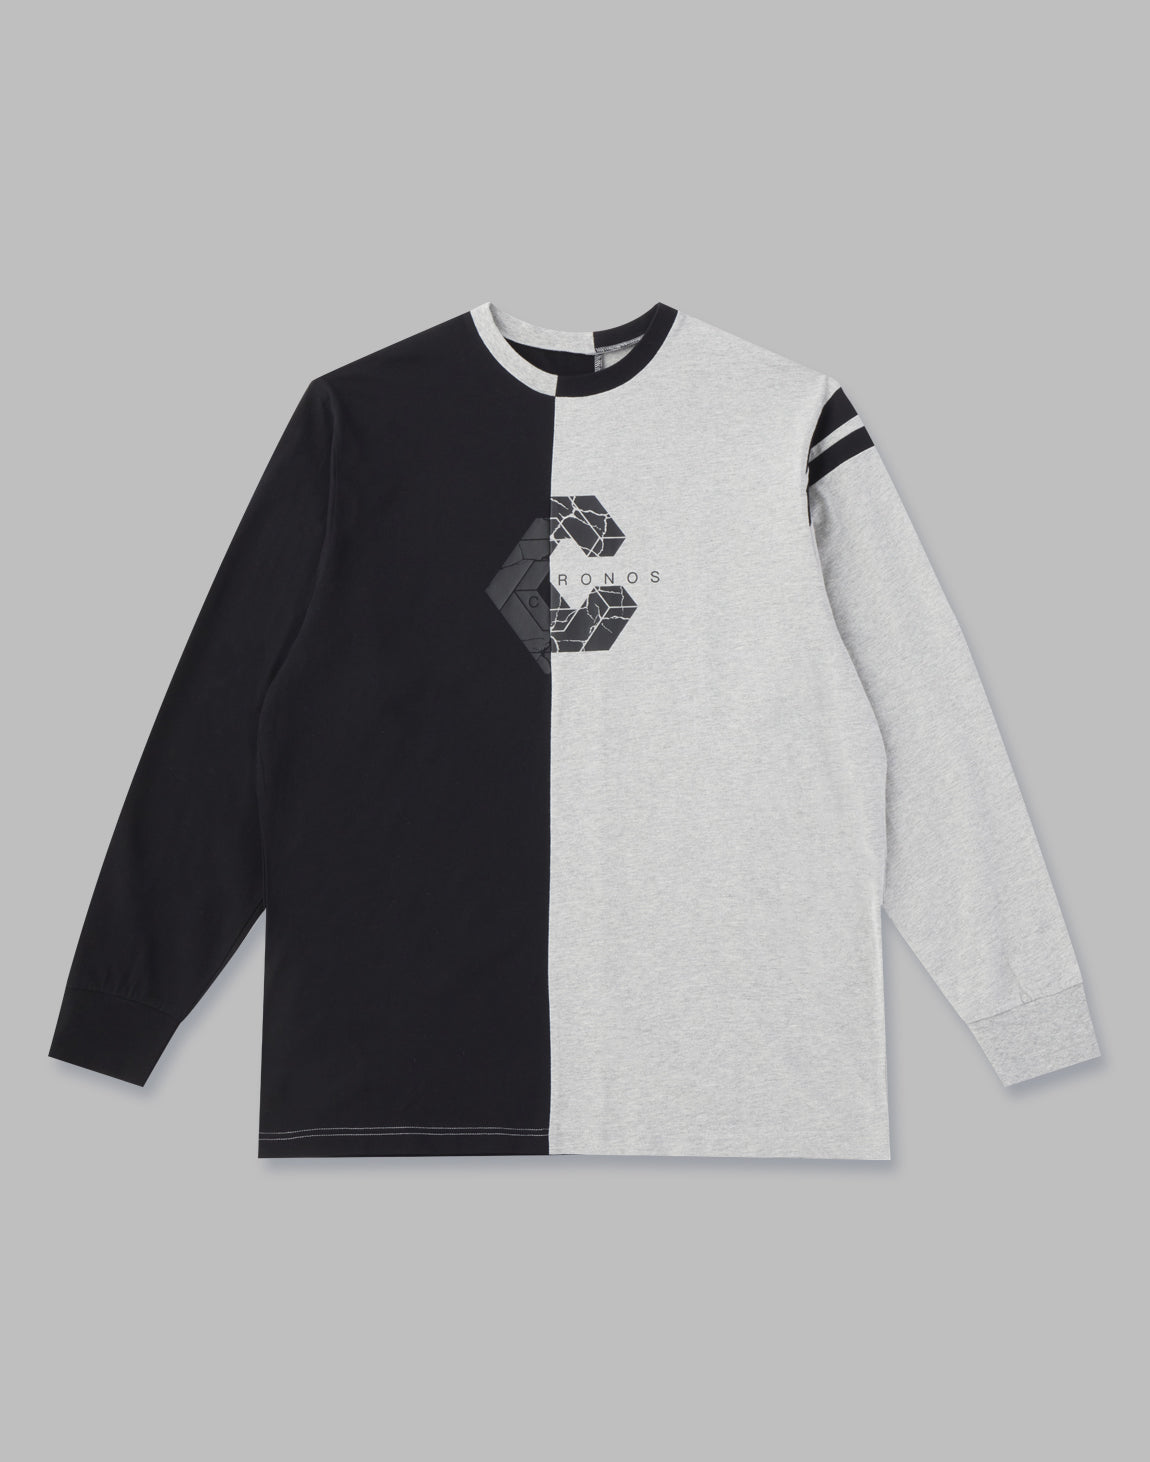 CRONOS UNEQUALLY LONGSLEEVE – クロノス CRONOS Official Store